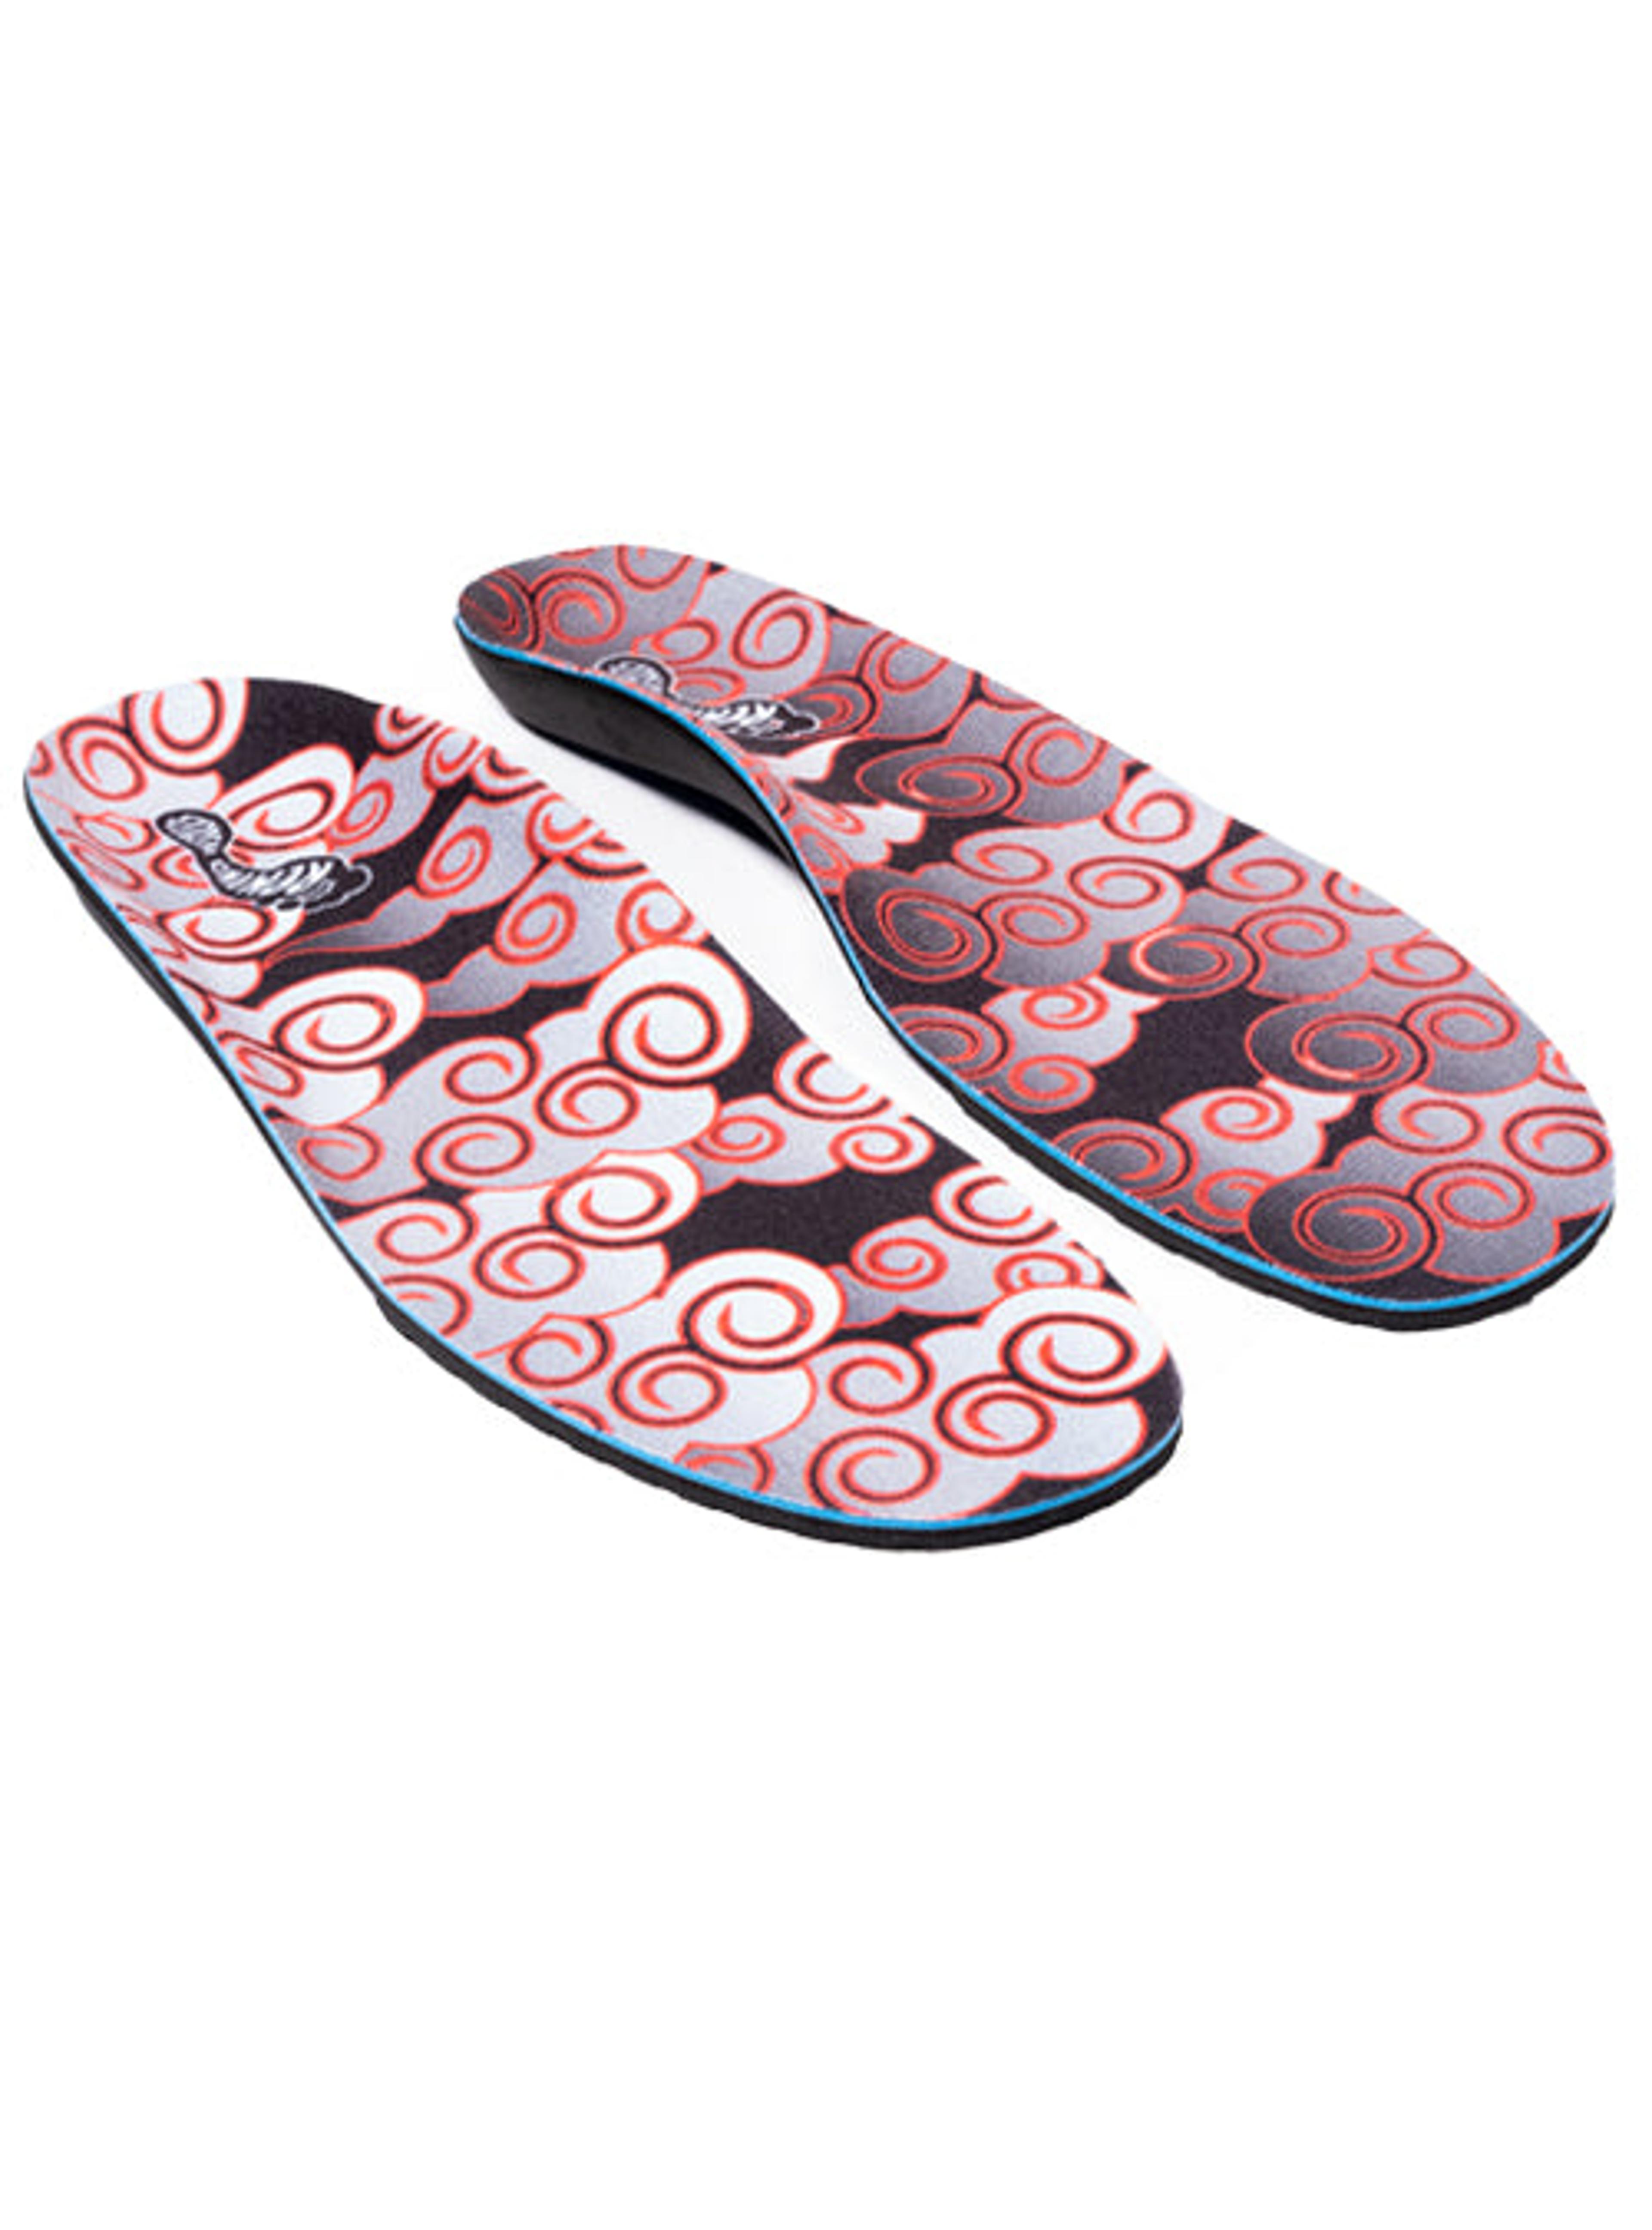 Alternate View 3 of MEDIC CLASSIC 5MM Mid-High Arch | Clouds Insoles